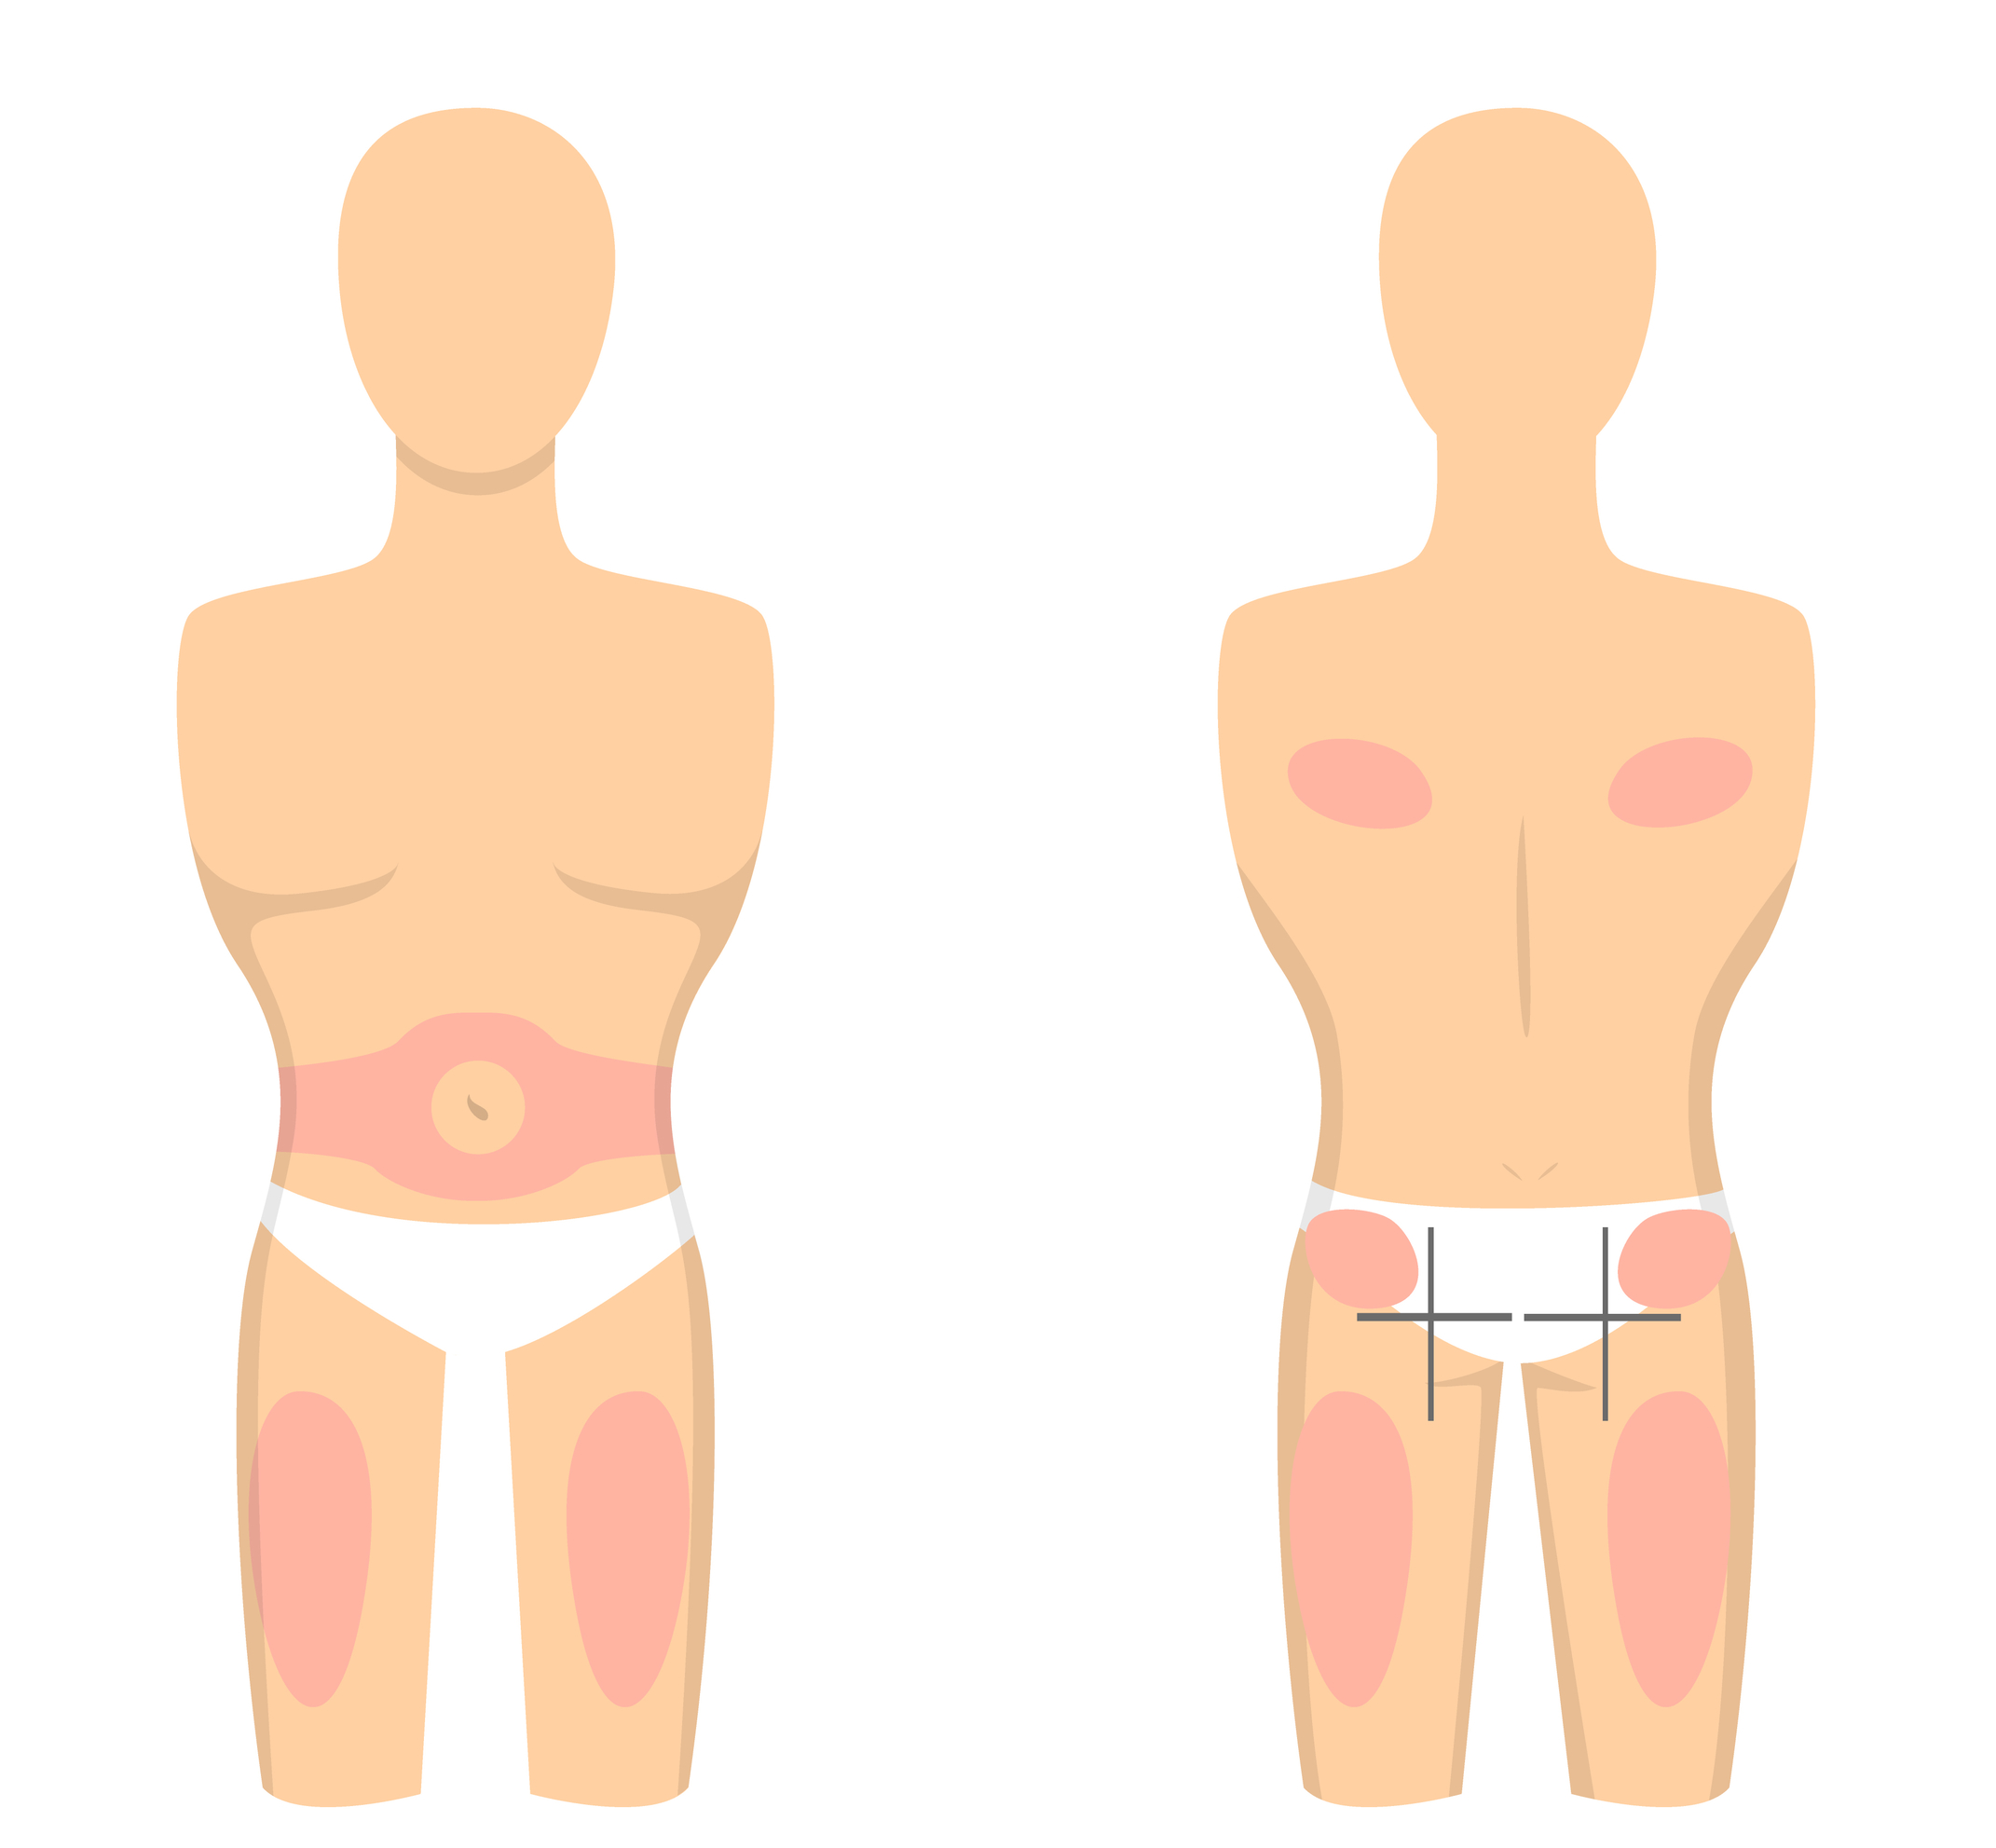 subcutaneous injection sites